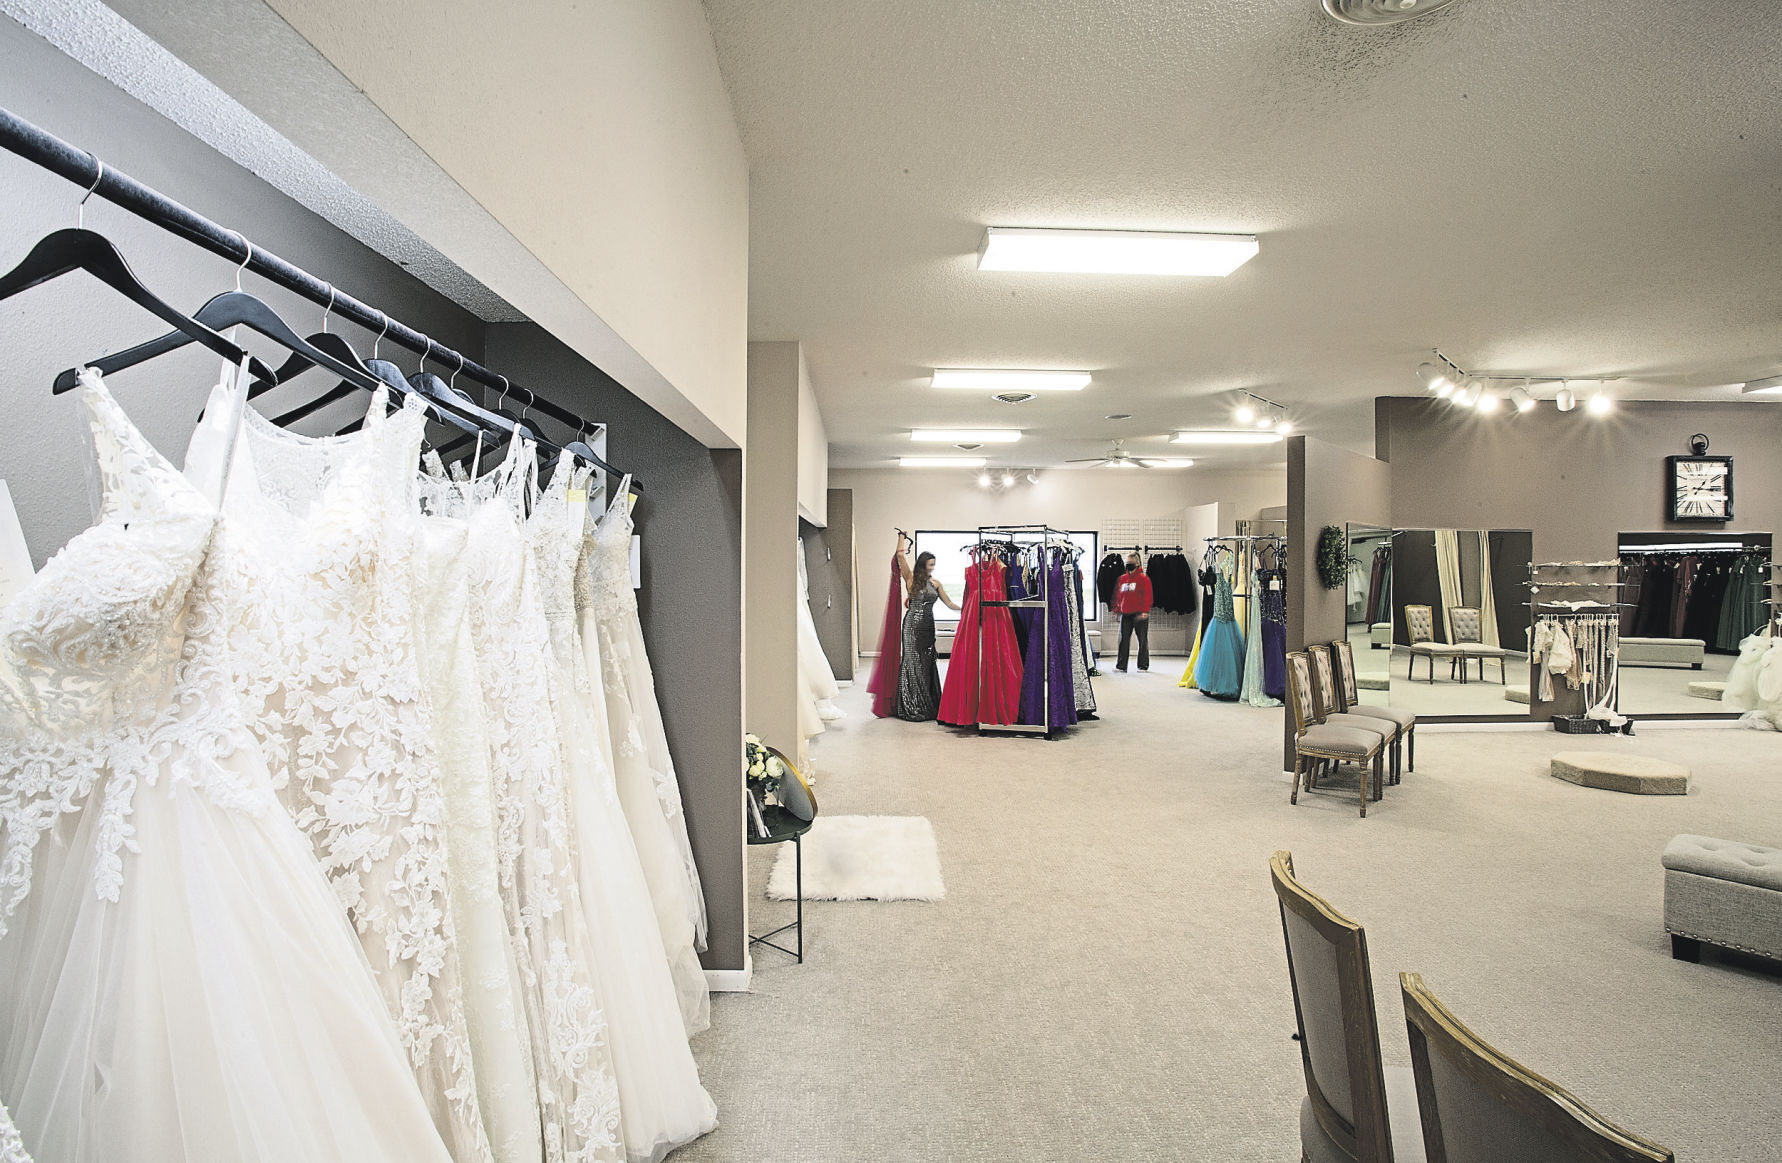 Brides & Weddings are among the area formal attire shops that has seen an uptick in business this year. PHOTO CREDIT: Stephen Gassman